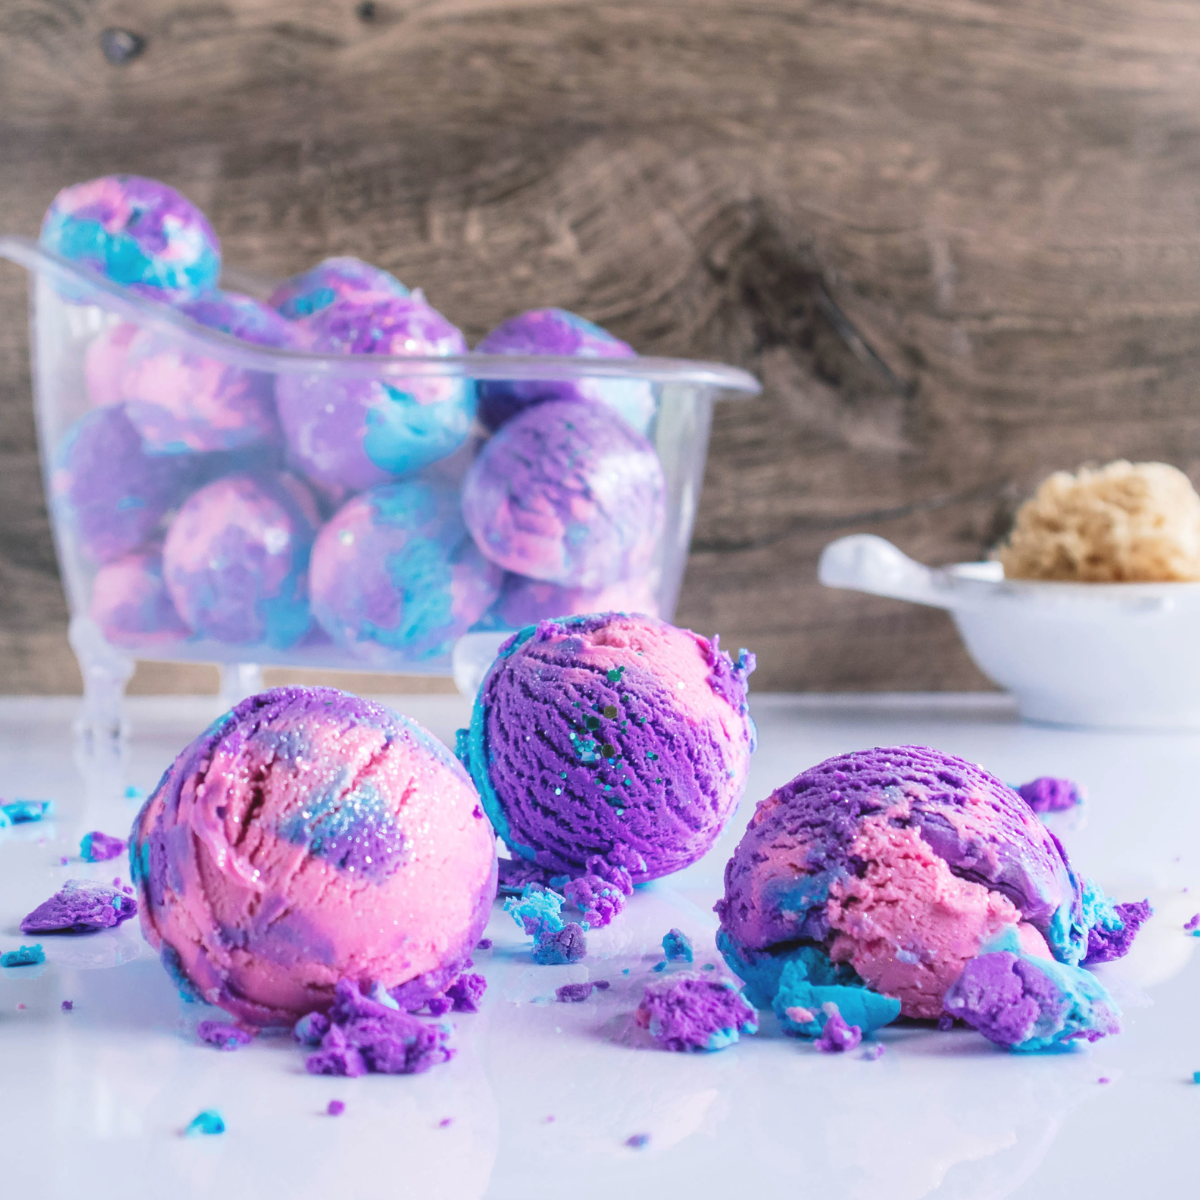 3 solid bubble bath, pink blue and purple with glitter on top are sitting in front of a clear bath tub full of more solid bubble baths.  there is a sprinkling of broken up bubble bath crumbles laying all around